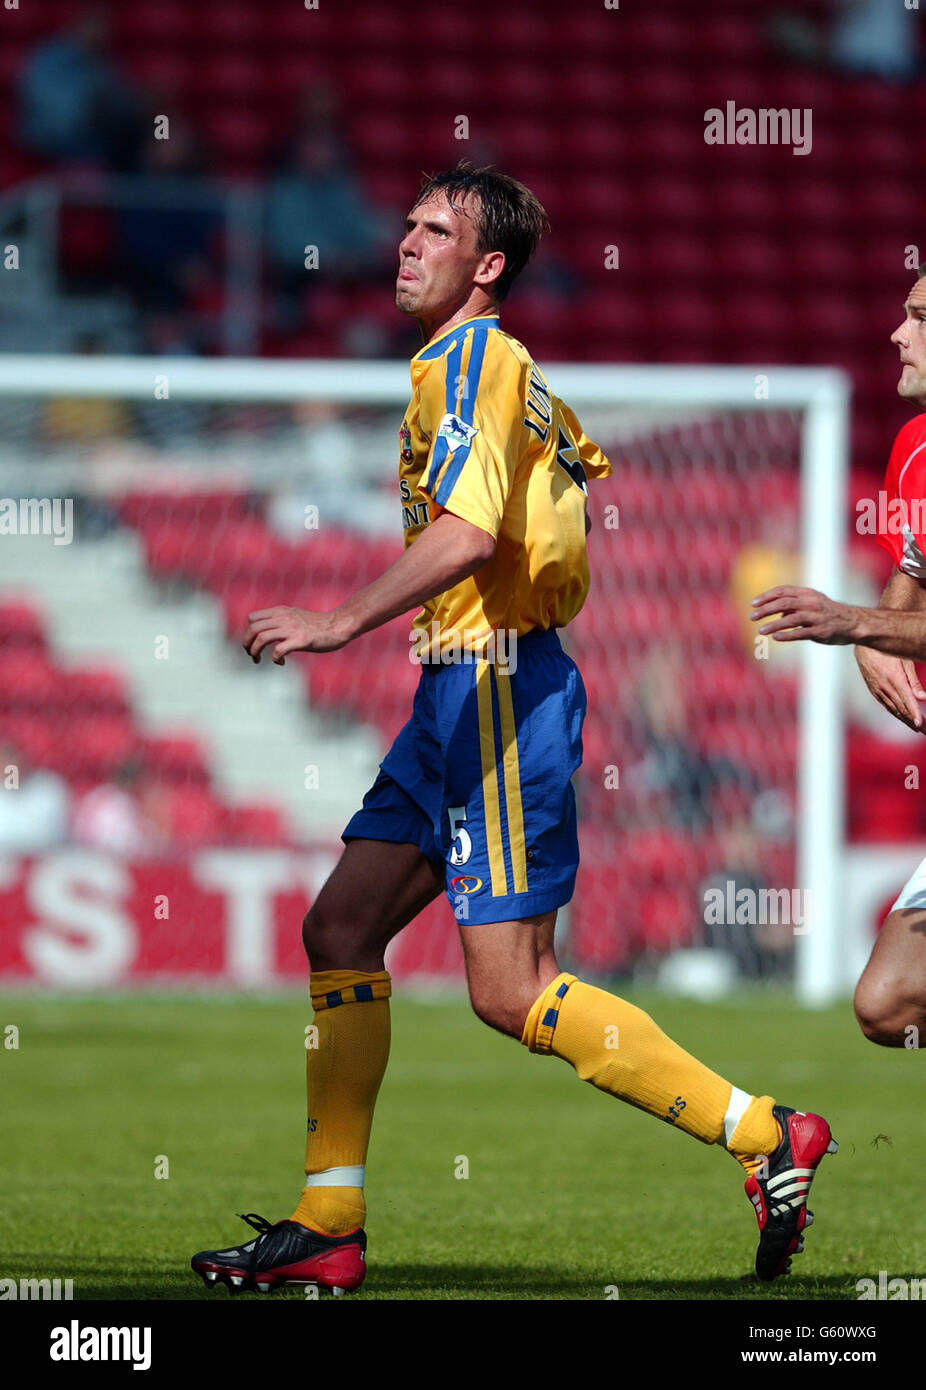 Claus Lundekvam in action during the pre-season friendly game between Southampton and FC Utrecht at St Mary's stadium, Southampton. Stock Photo